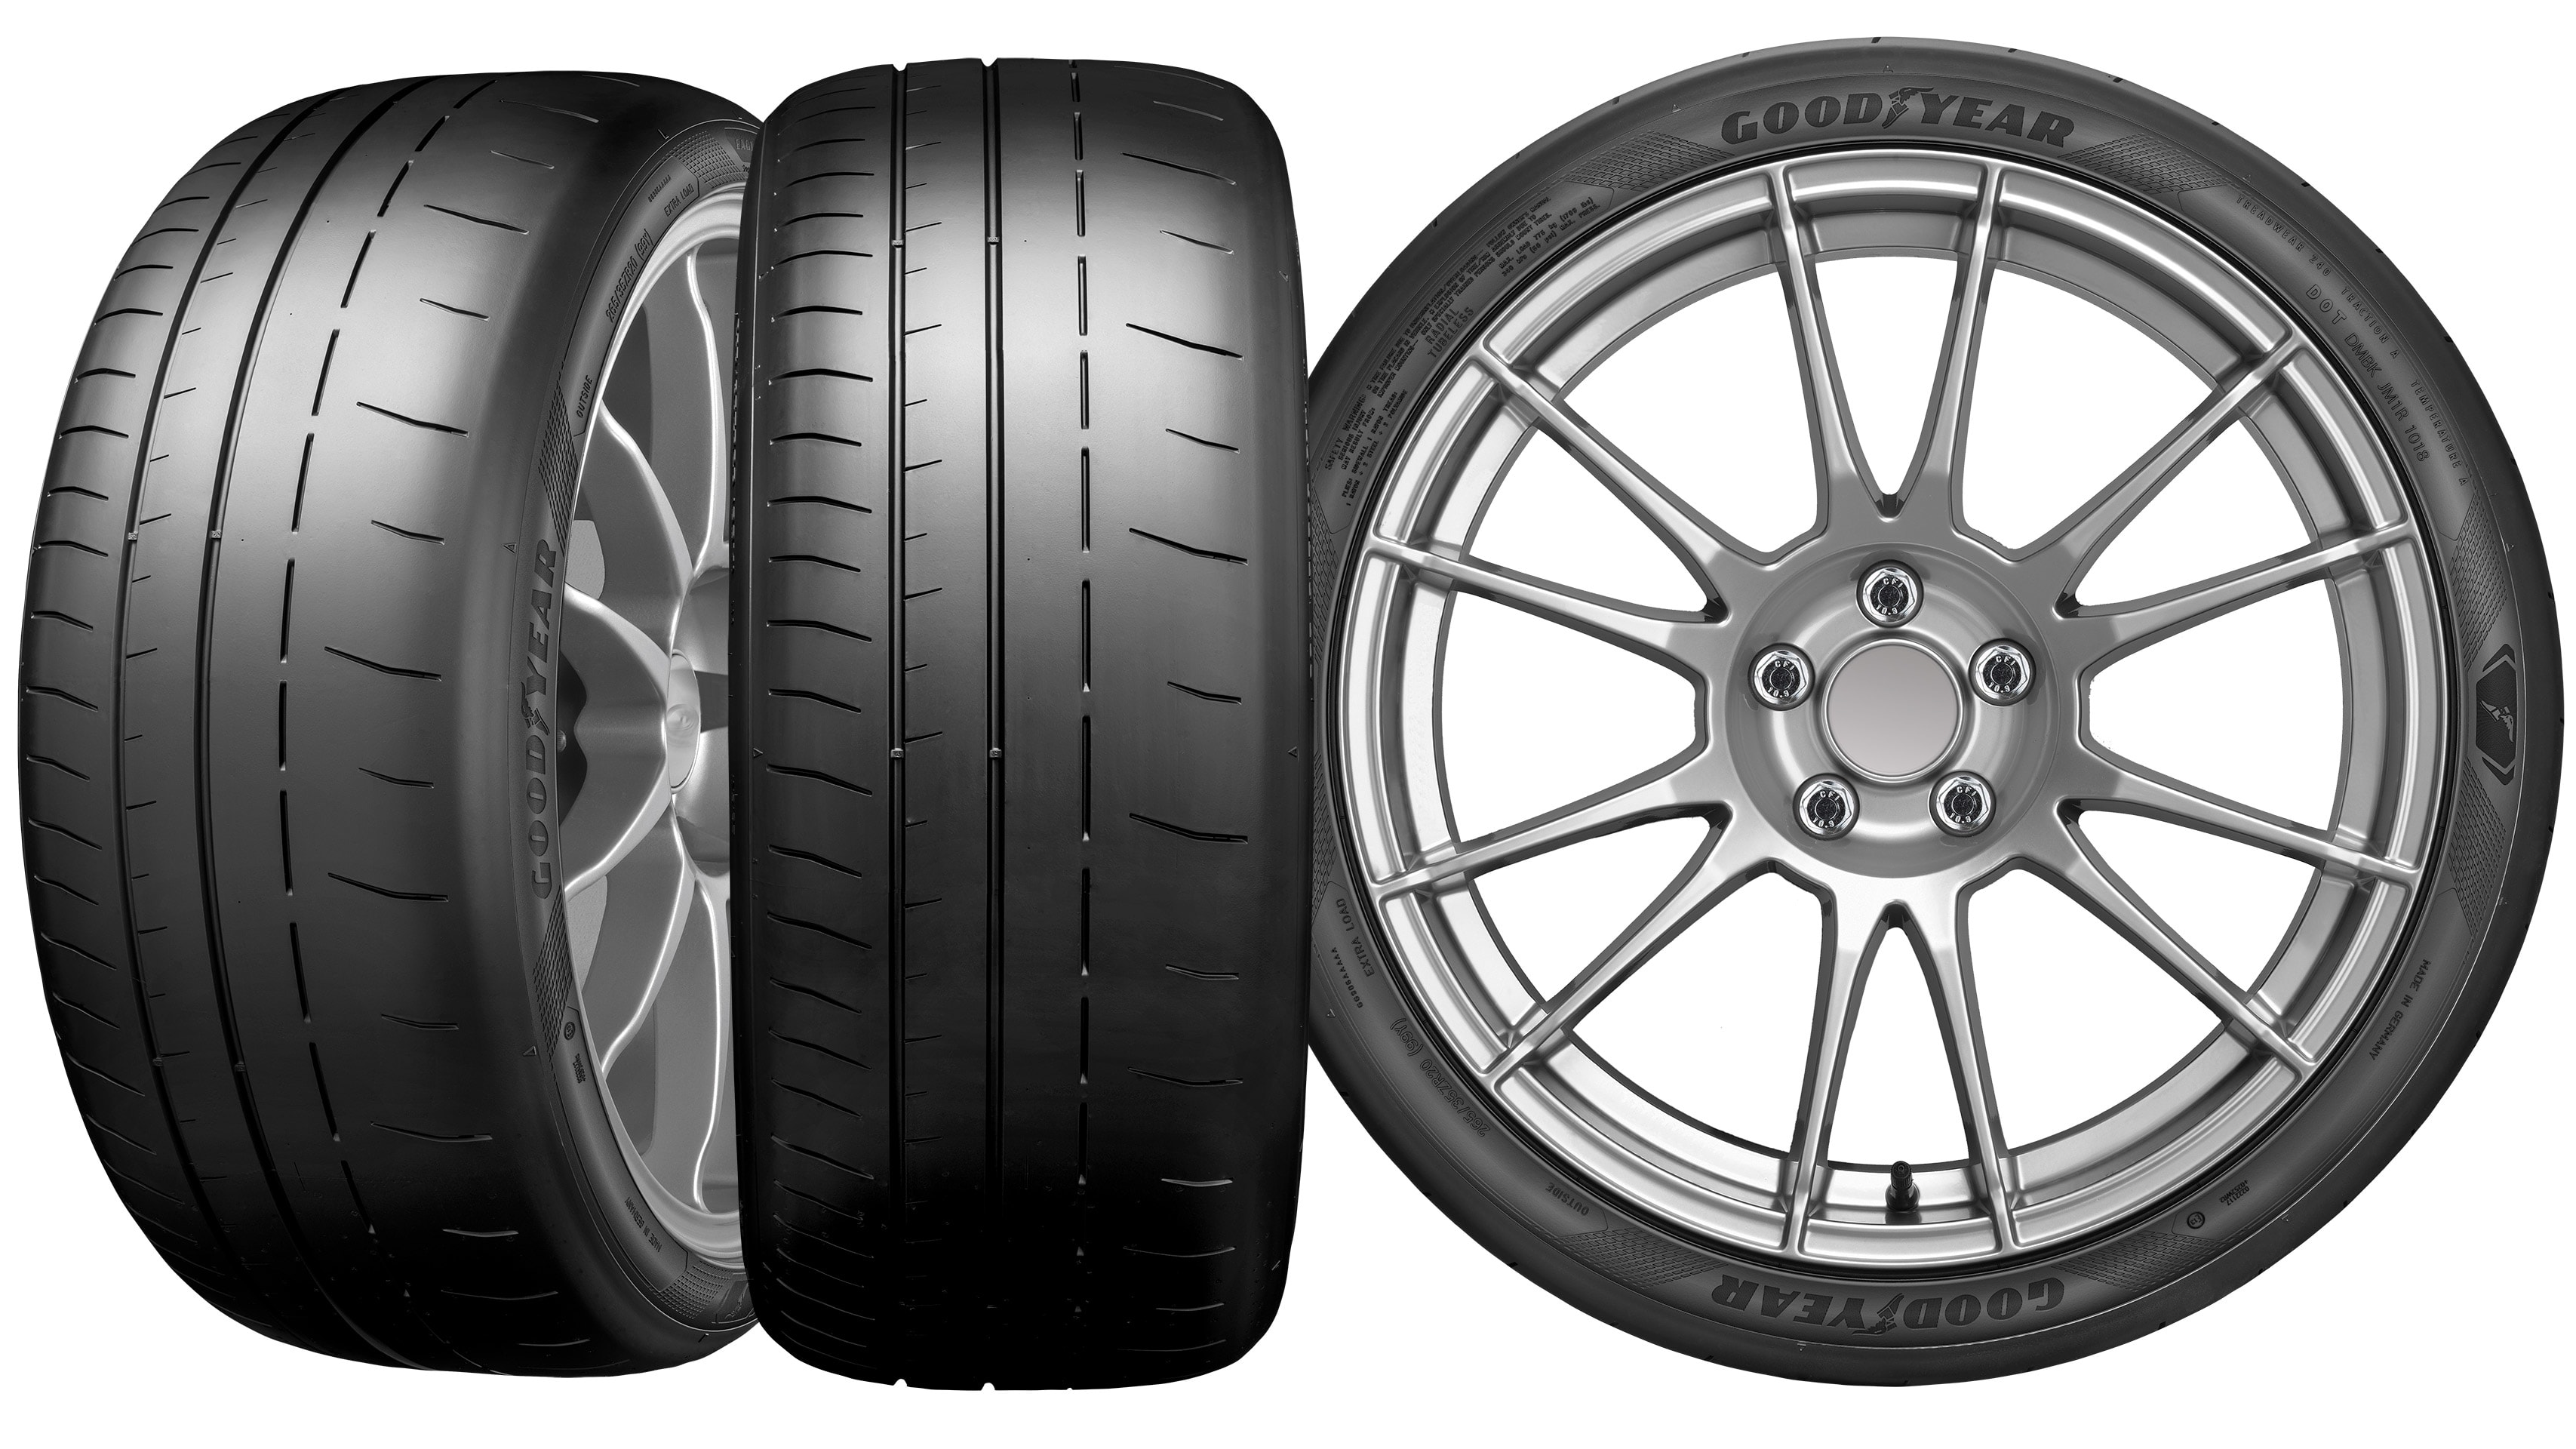 Goodyear Supersport Rs Faster Than Michelin Pilot Sport Cup 2s